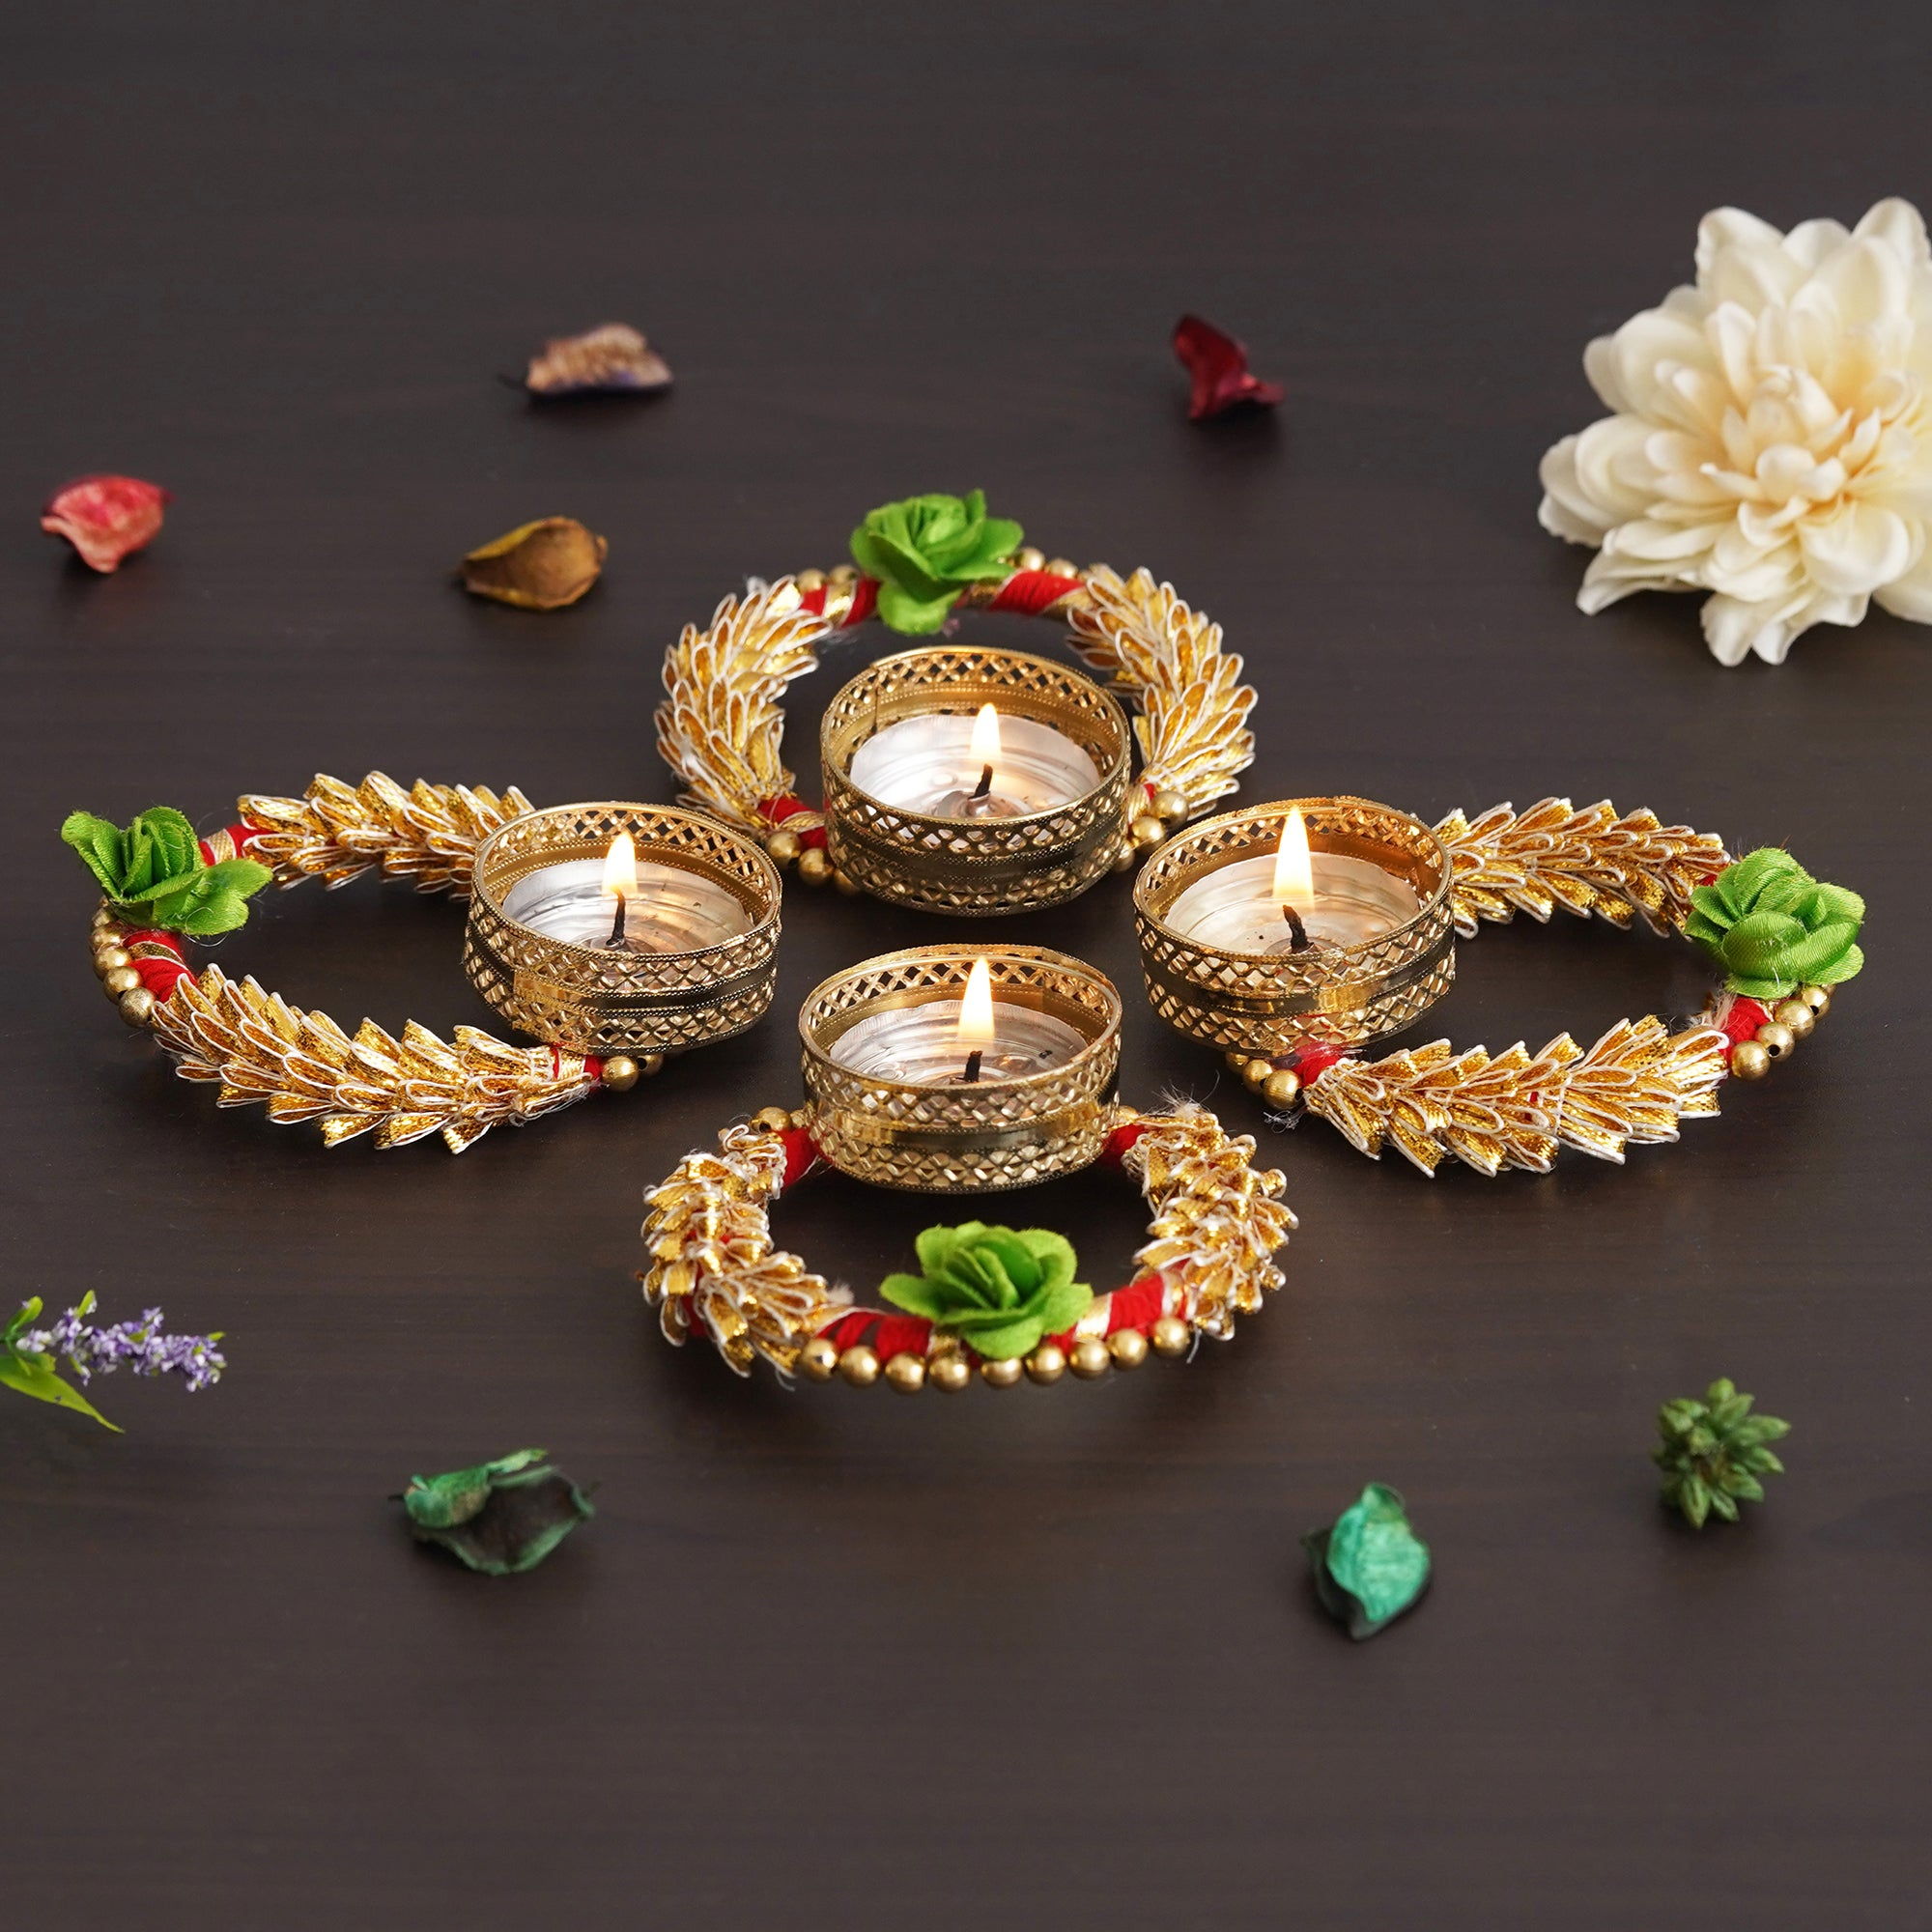 eCraftIndia Set of 4 Green and Golden Round Shaped Floral Decorative Tea Light Candle Holders 4